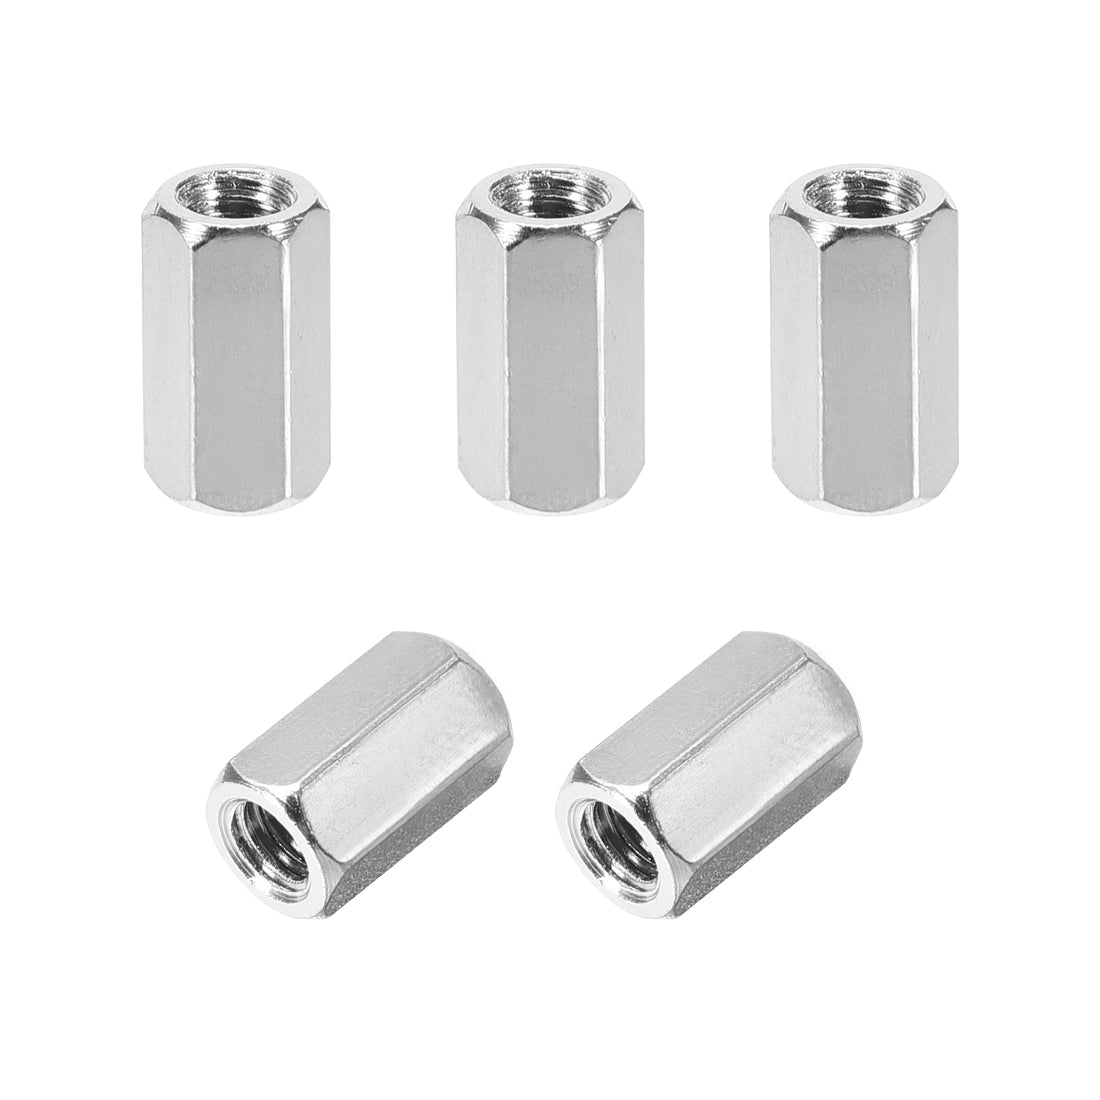 Uxcell Uxcell M4 x 25mm Female to Female Hex Nickel Plated Spacer Standoff 5pcs